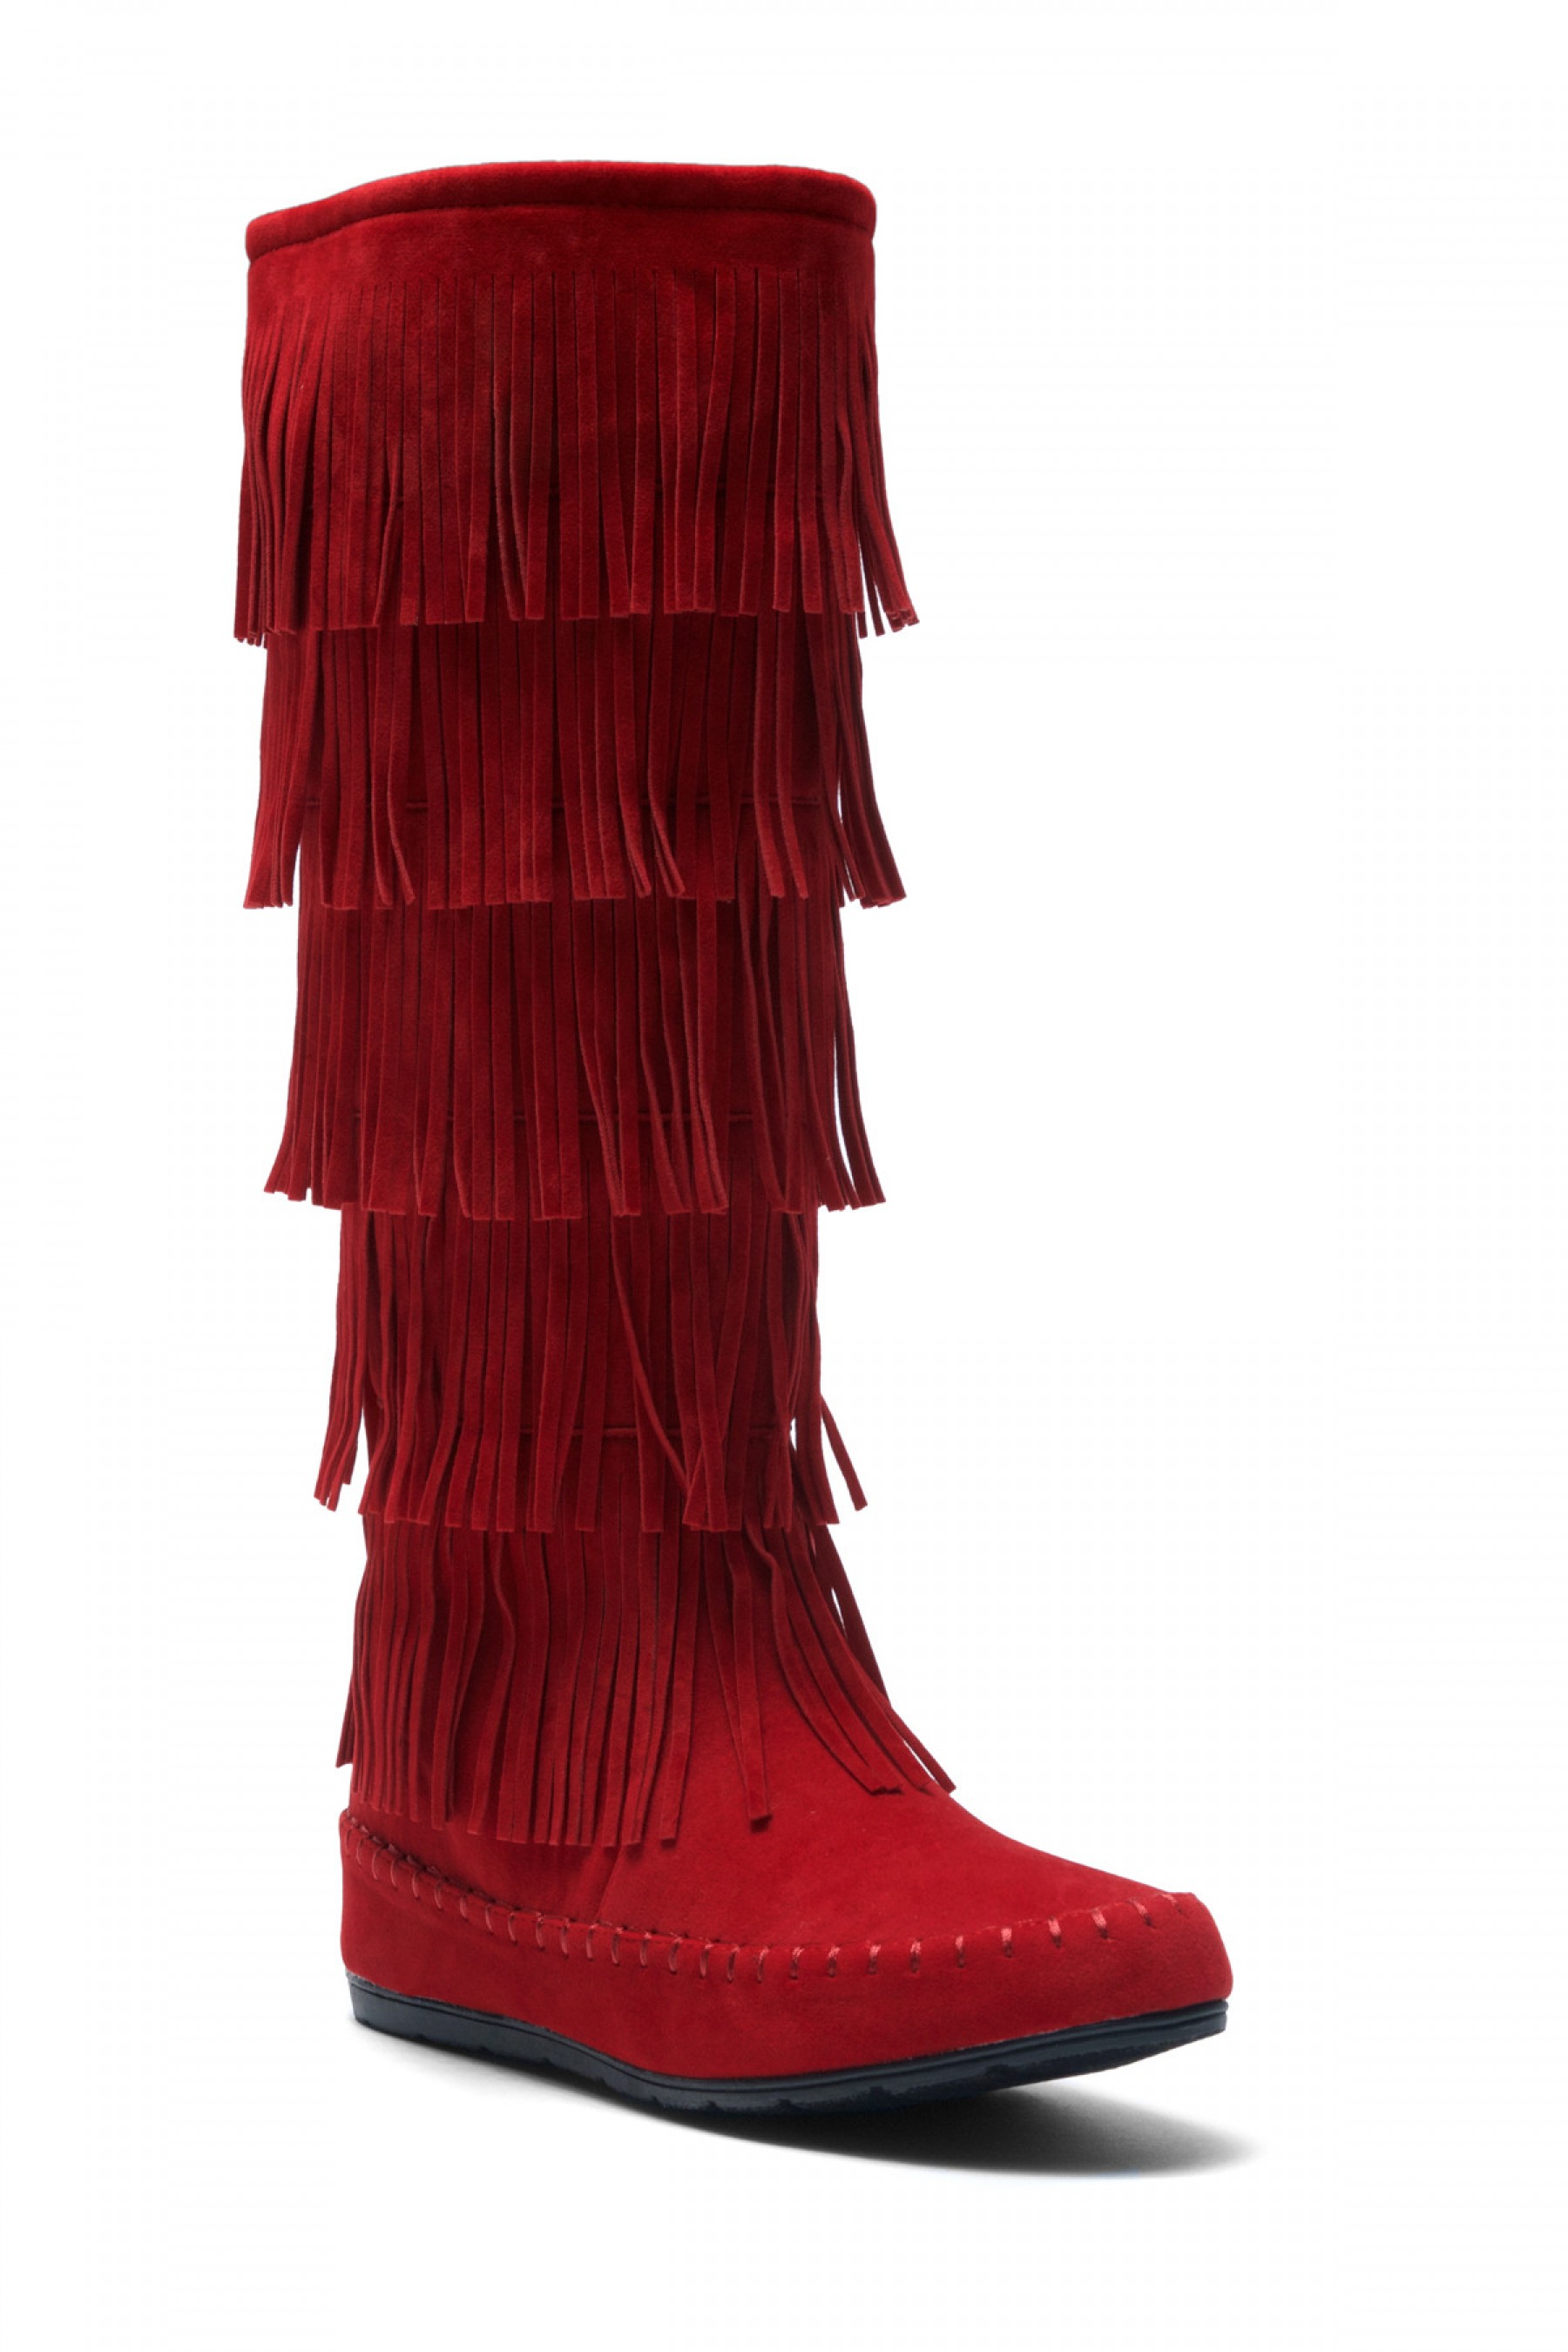 moccasin boots womenu0027s burgundy maddyyee faux suede knee high fringed five-layer moccasin  boots sdudgrc